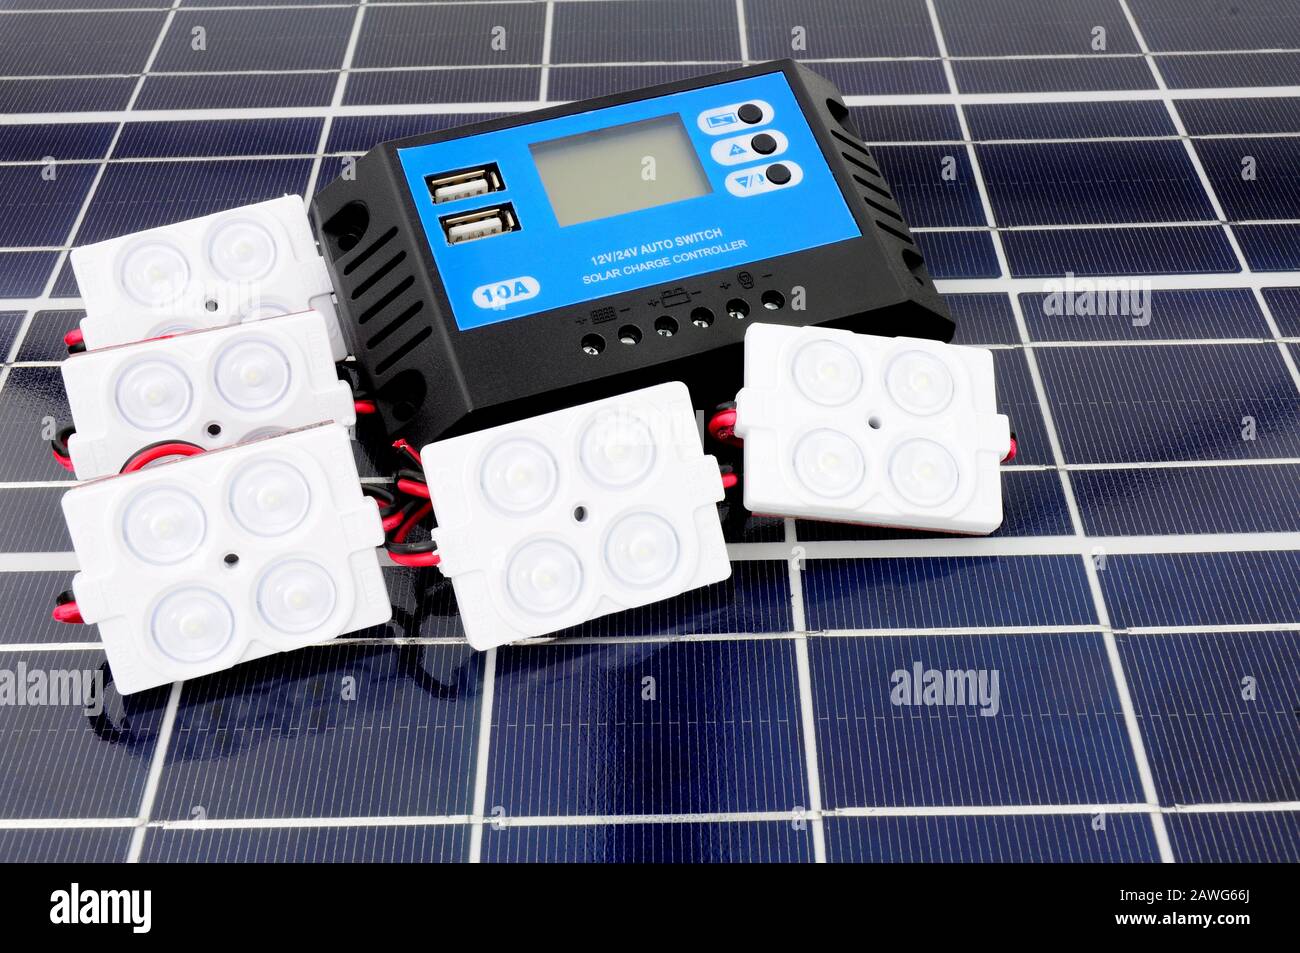 Solar lighting kit with lights and charger control unit on a solar panel background Stock Photo